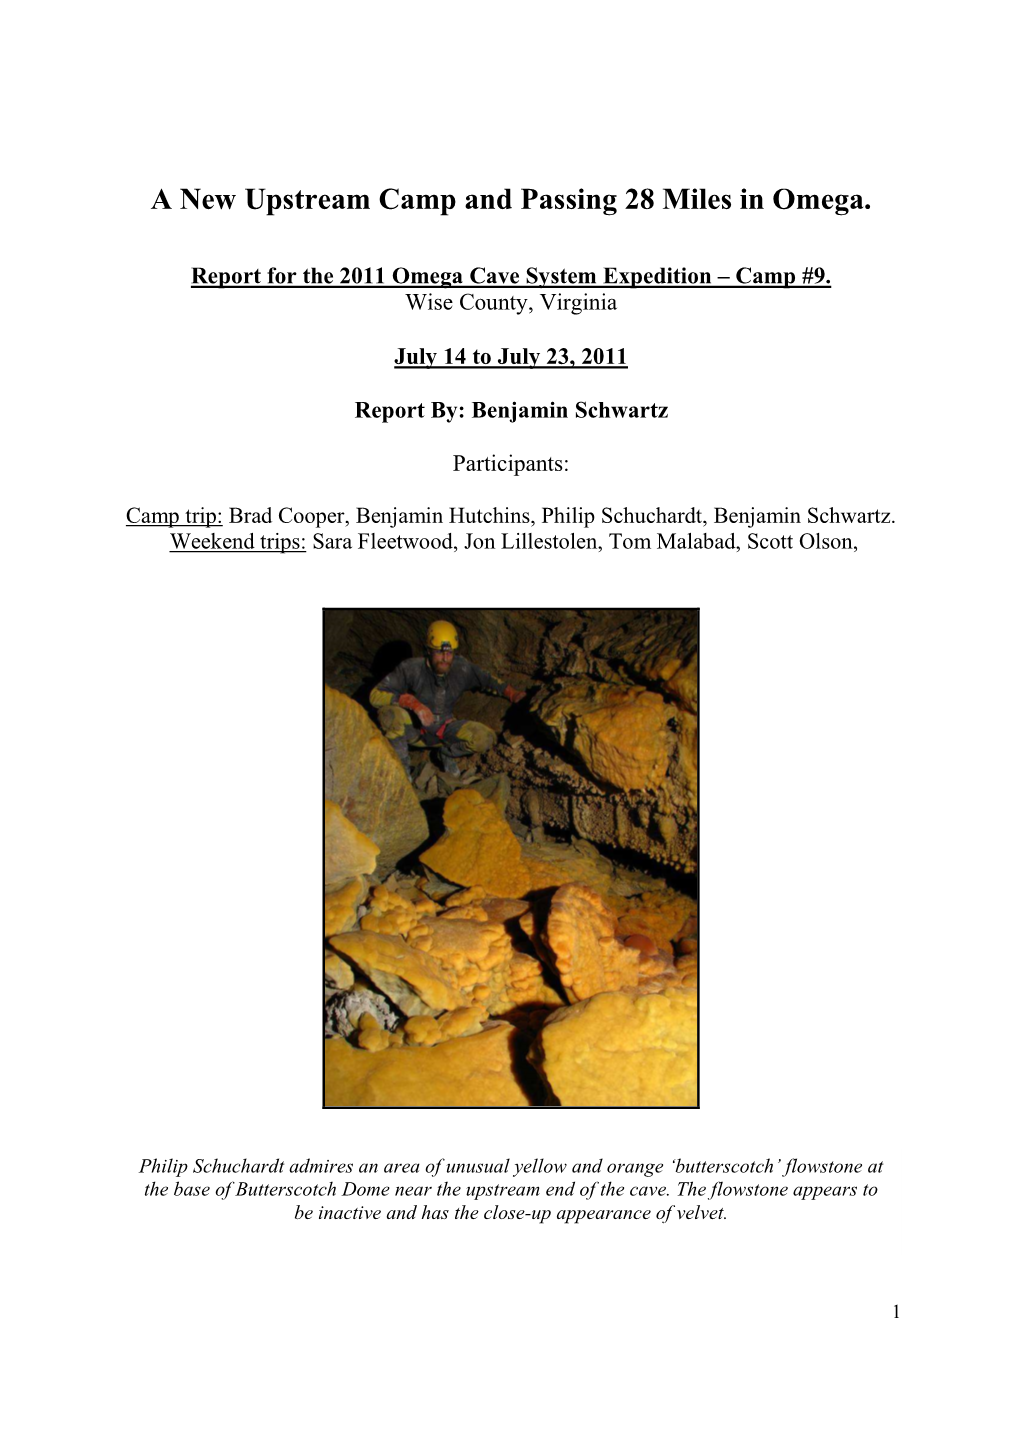 Report for the 2011 Omega Cave System Expedition – Camp #9